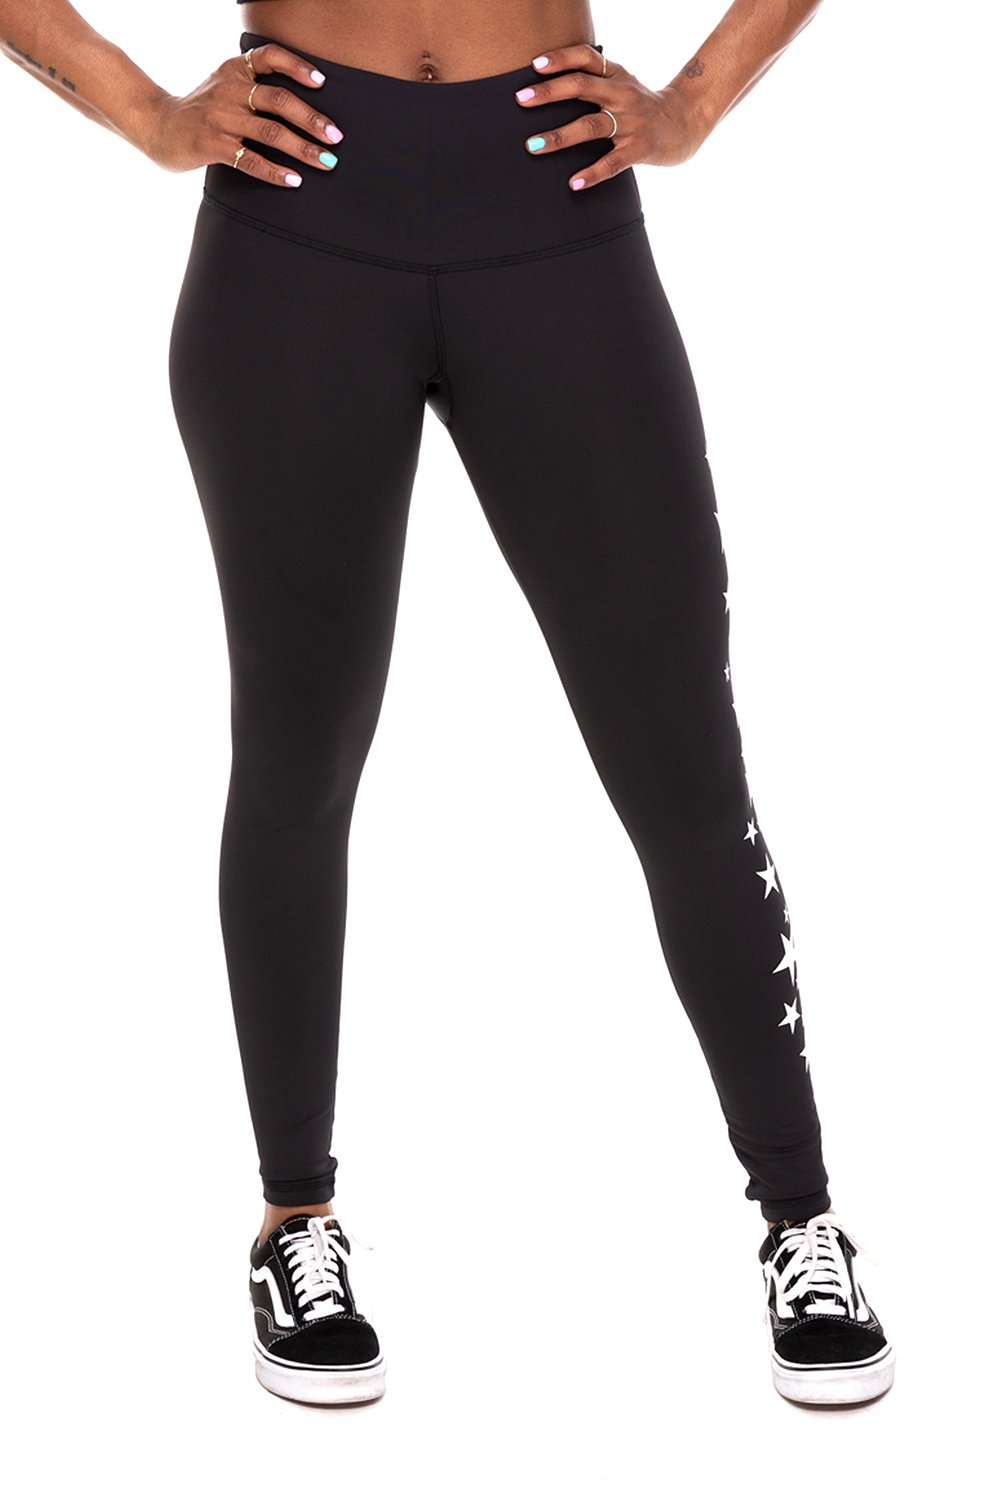 Star Cluster High Waist Ankle Legging - Black/White Stars - Sweat with Soul